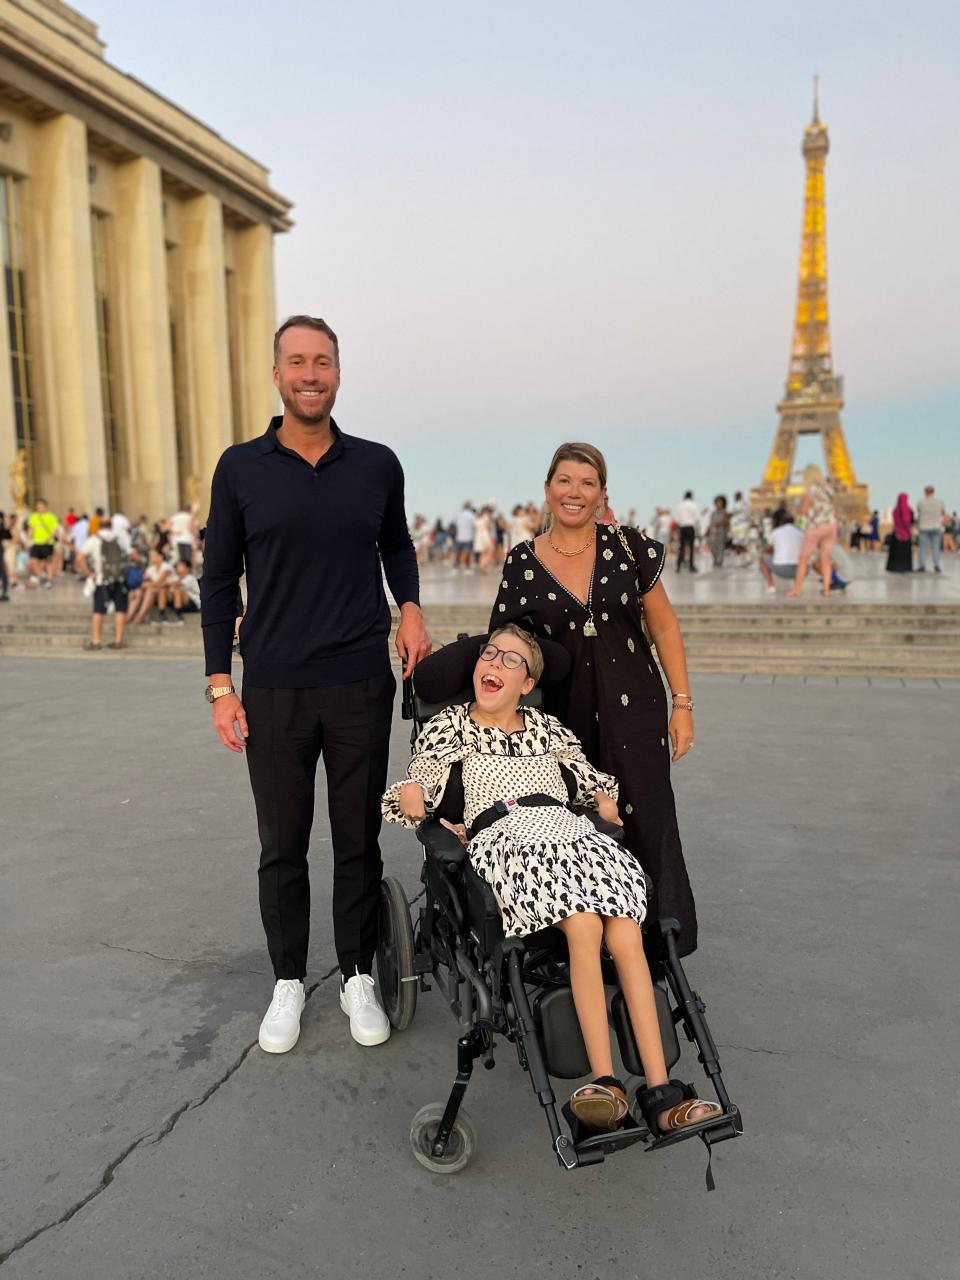 Richard Laver with his wife, Michelle, and daughter, Katie, who is seated in a wheelchair. The family is on vacation in Paris.